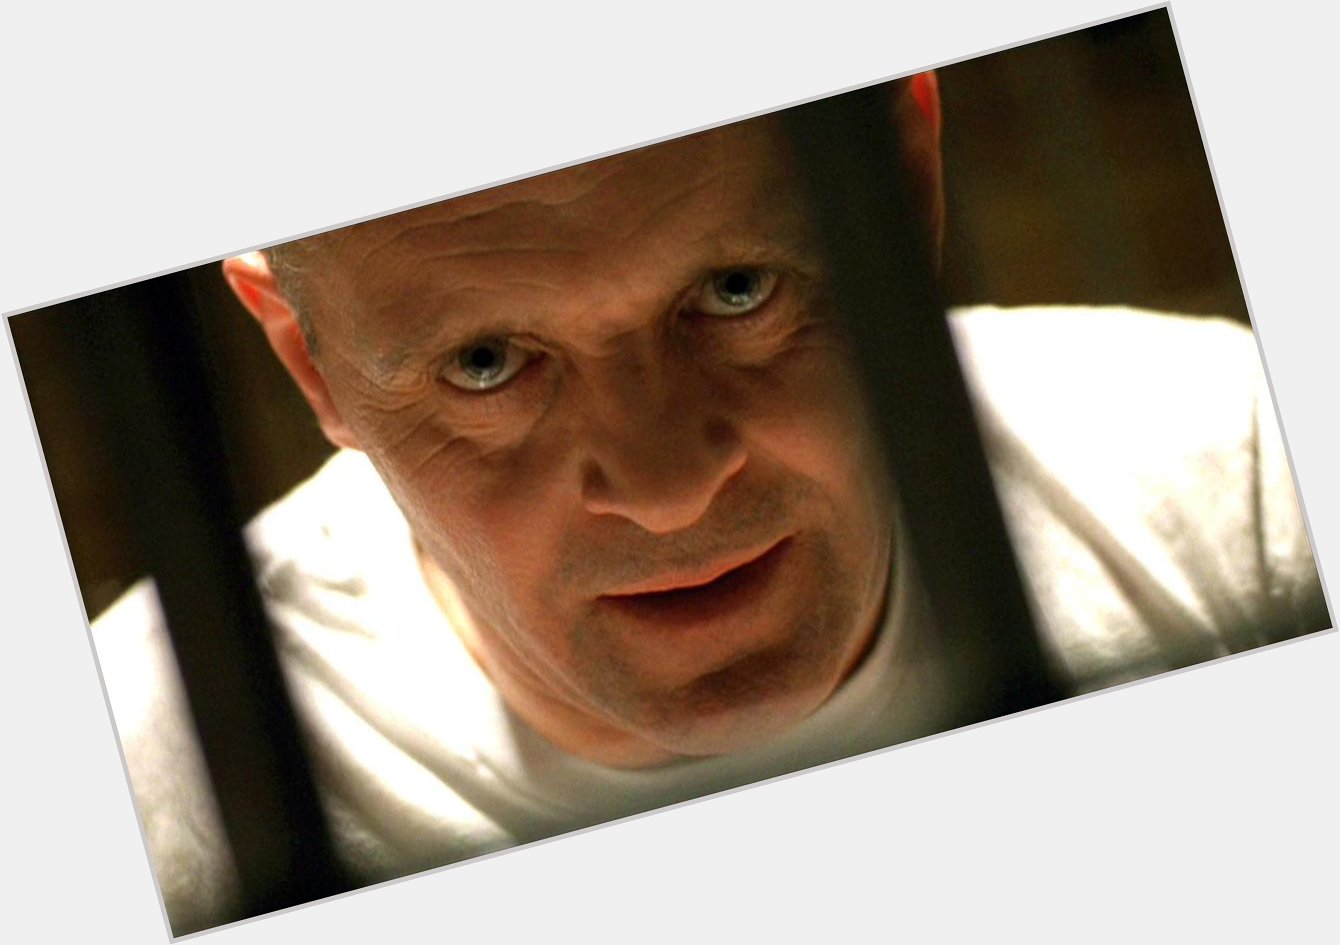 VERY HAPPY BIRTHDAY TO SIR ANTHONY HOPKINS WHOS PORTRAYAL OF HANNIBAL LECTURE SCARED US ALL IN SILENCE OF THE LAMBS! 